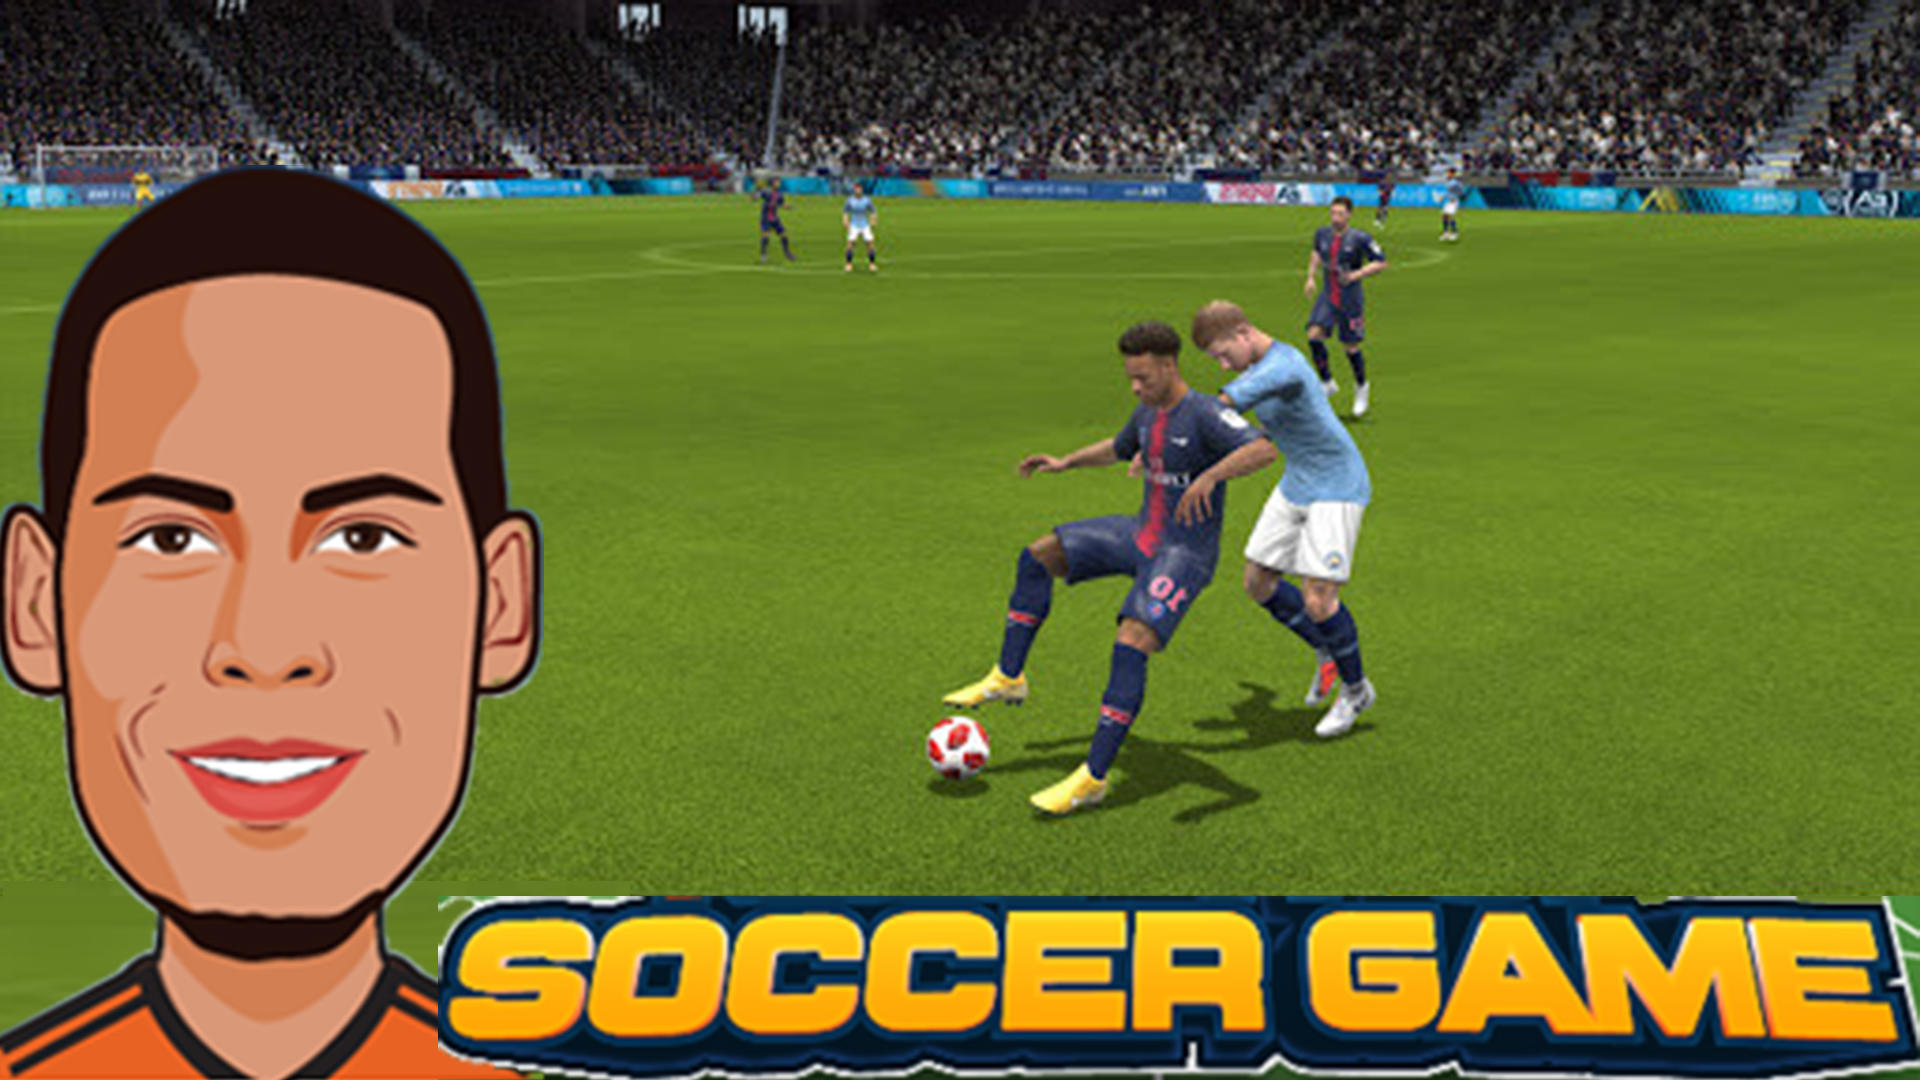 Penalty Shooters 2 APK (Android Game) - Free Download